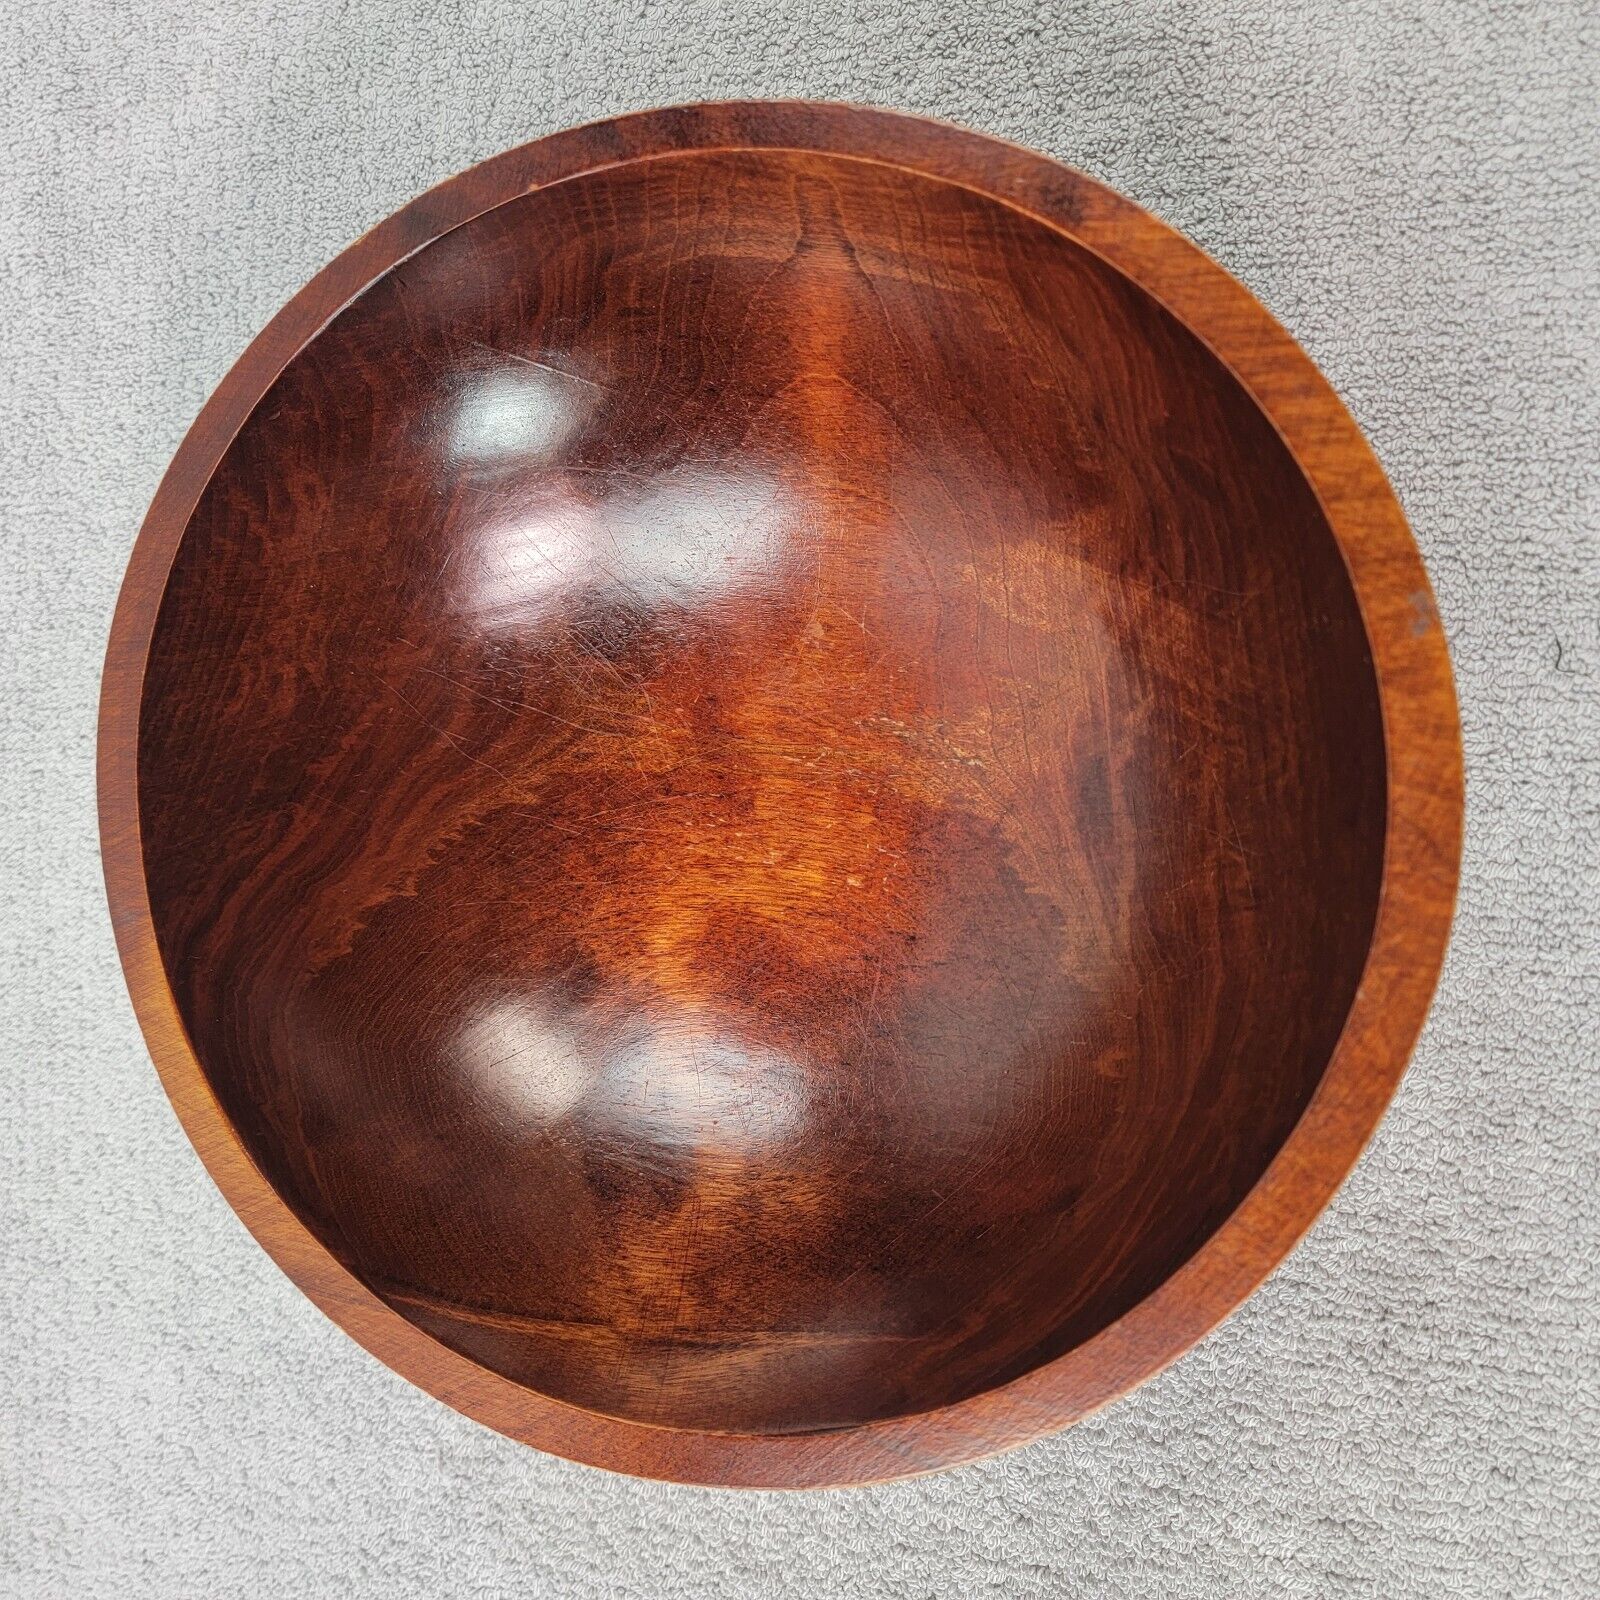 Vintage Mort N. Marton Corp.  Wood Bowl  10 9/16 inches Canadian Birch Handmade